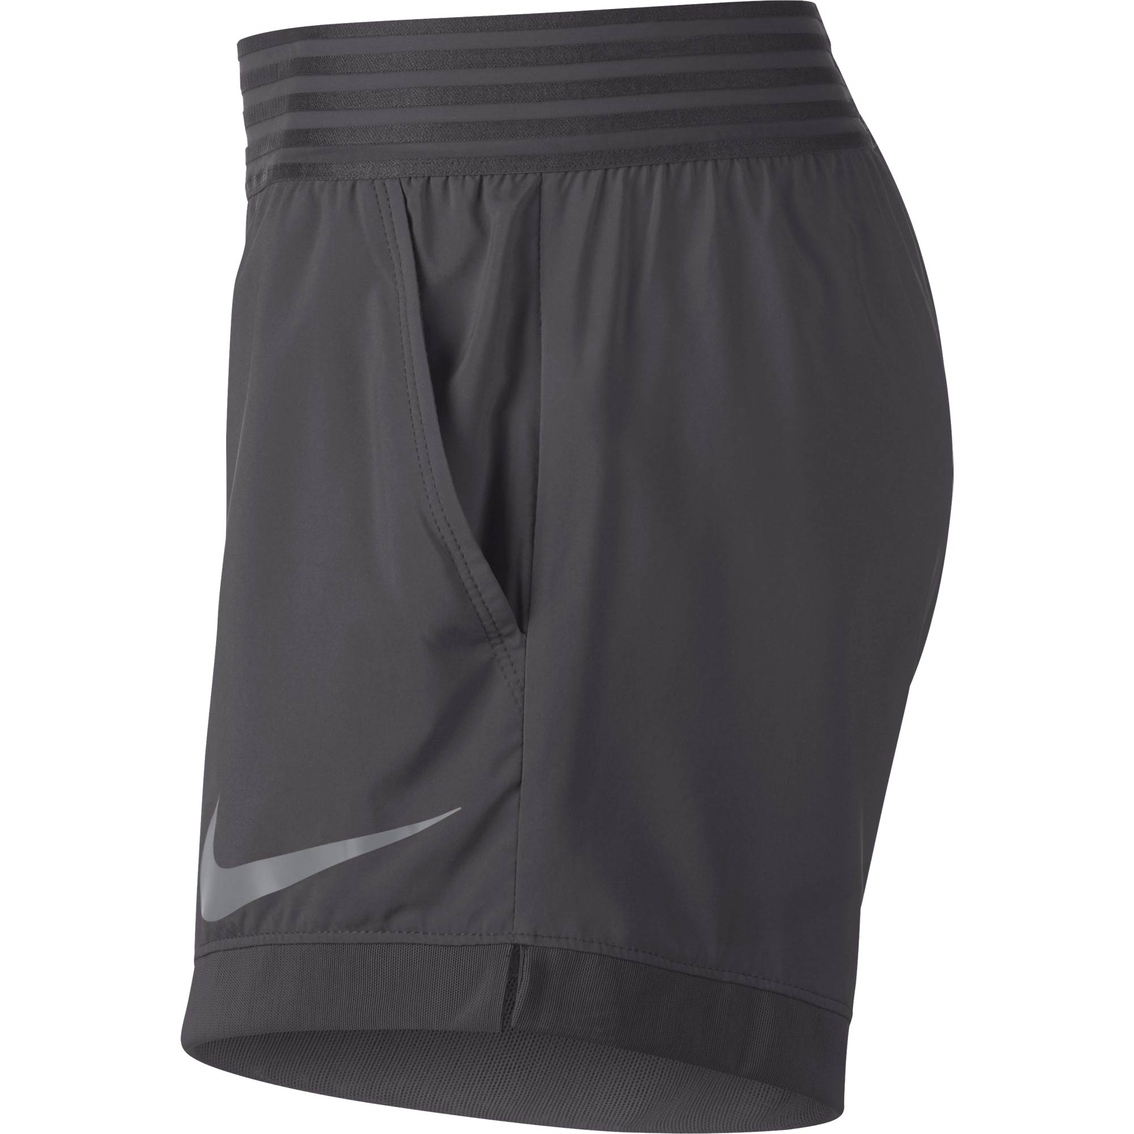 Nike  Flex 4 in. Shorts - Image 3 of 3